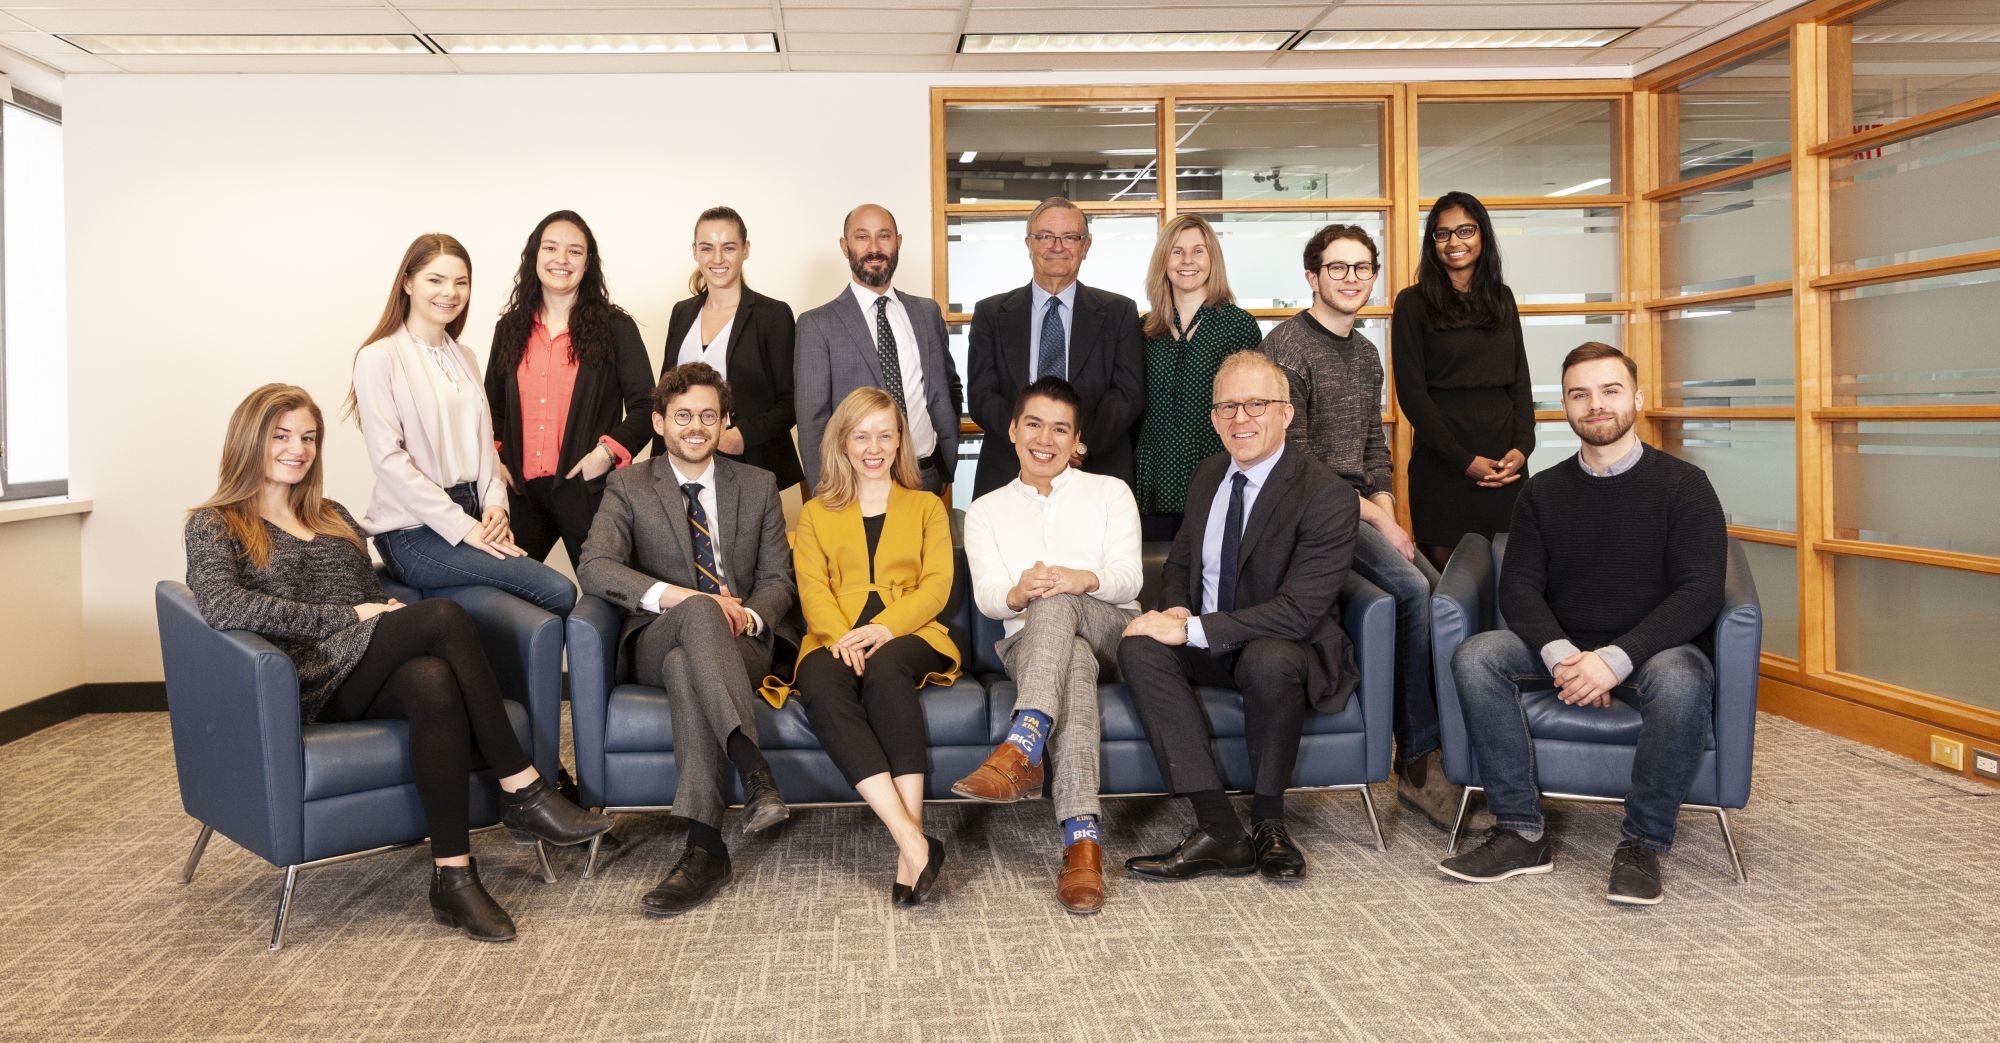 Queen's Law Criminal Faculty and Students